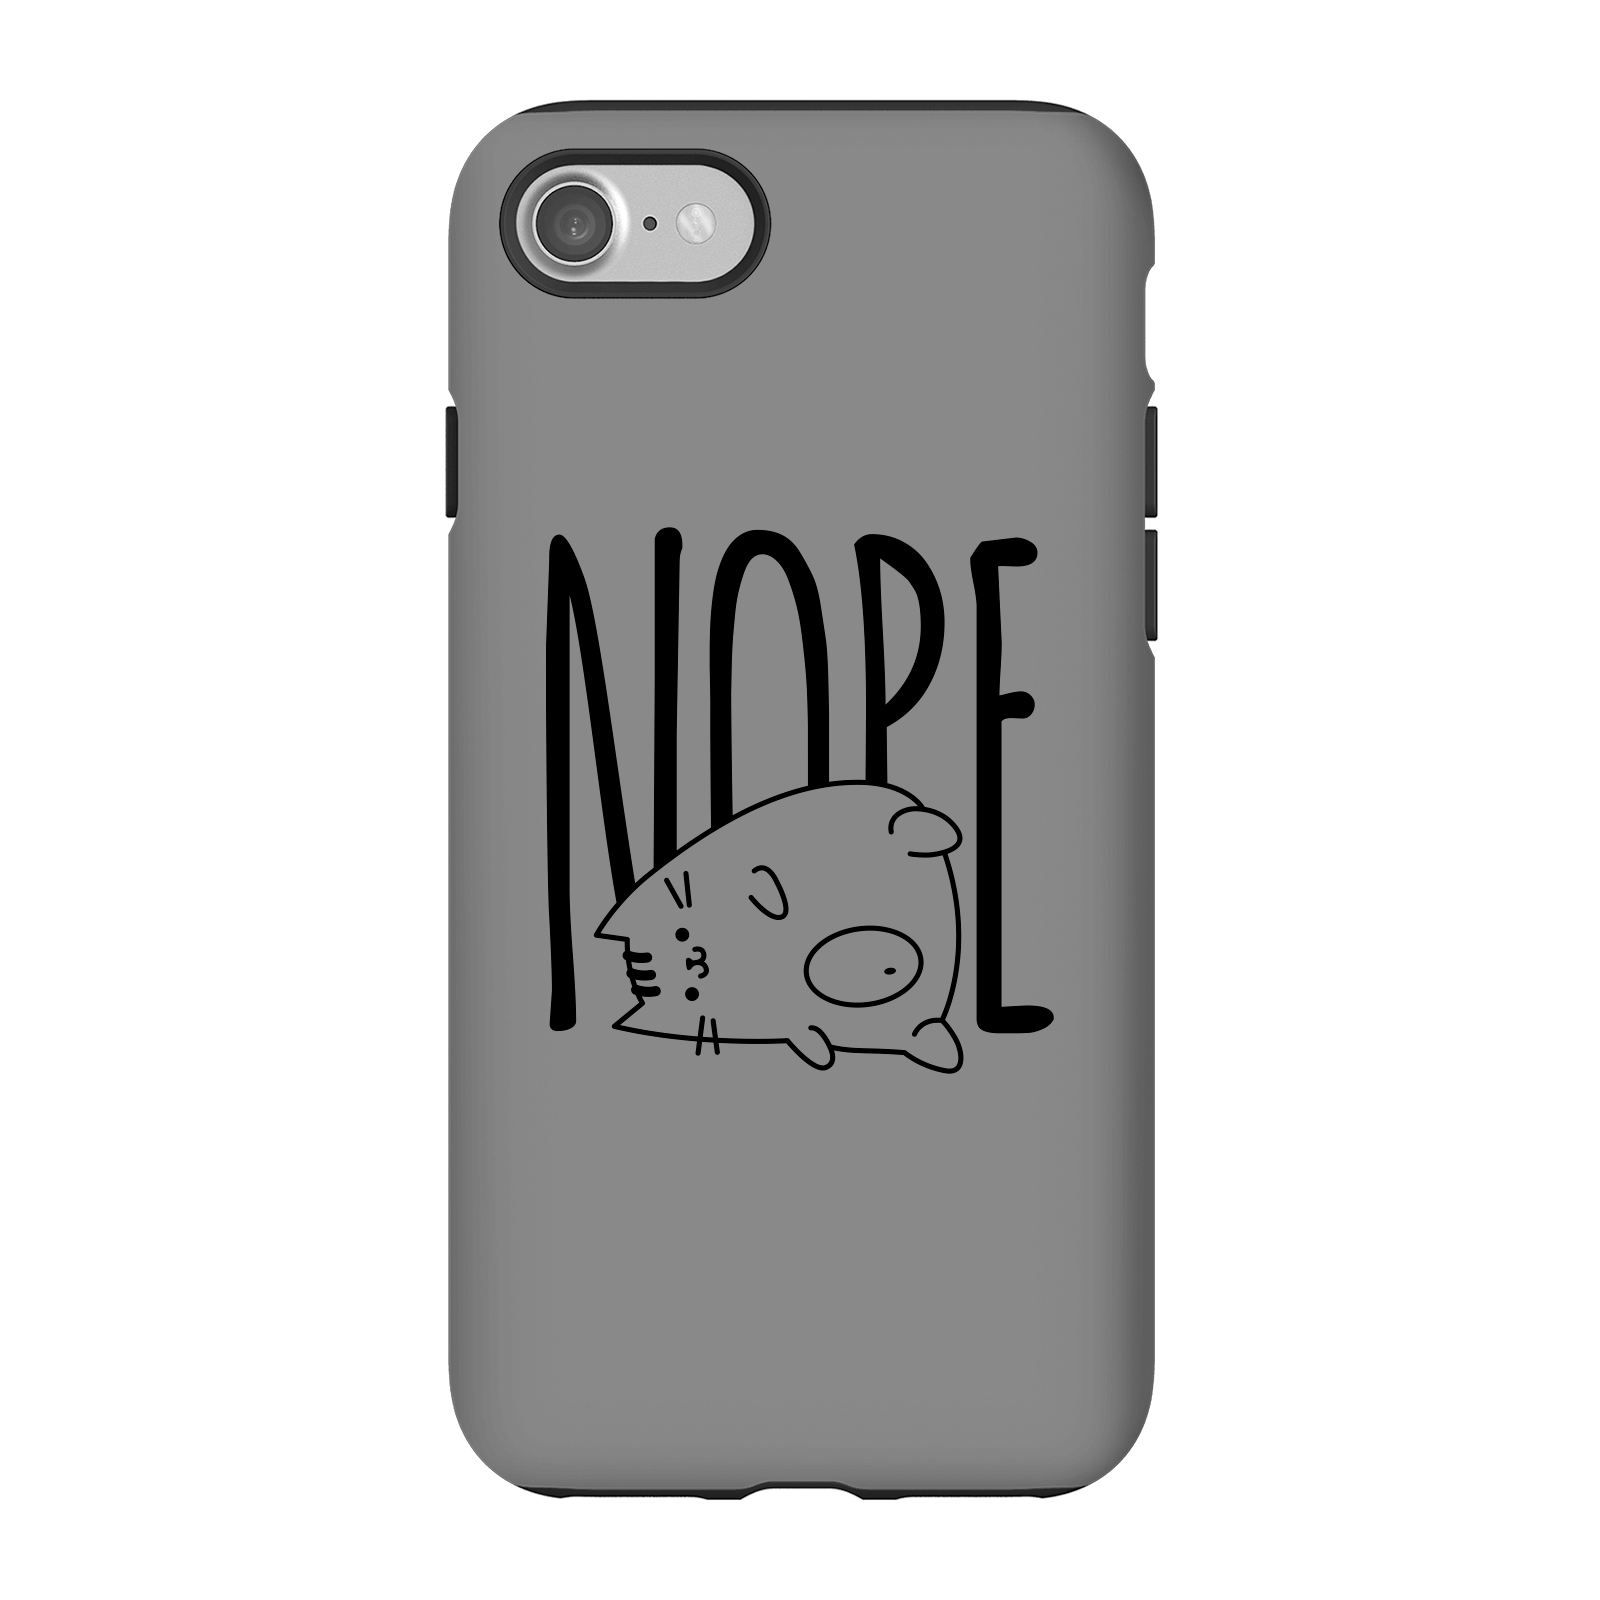 Nope Phone Case for iPhone and Android - iPhone 7 - Tough Case - Matte